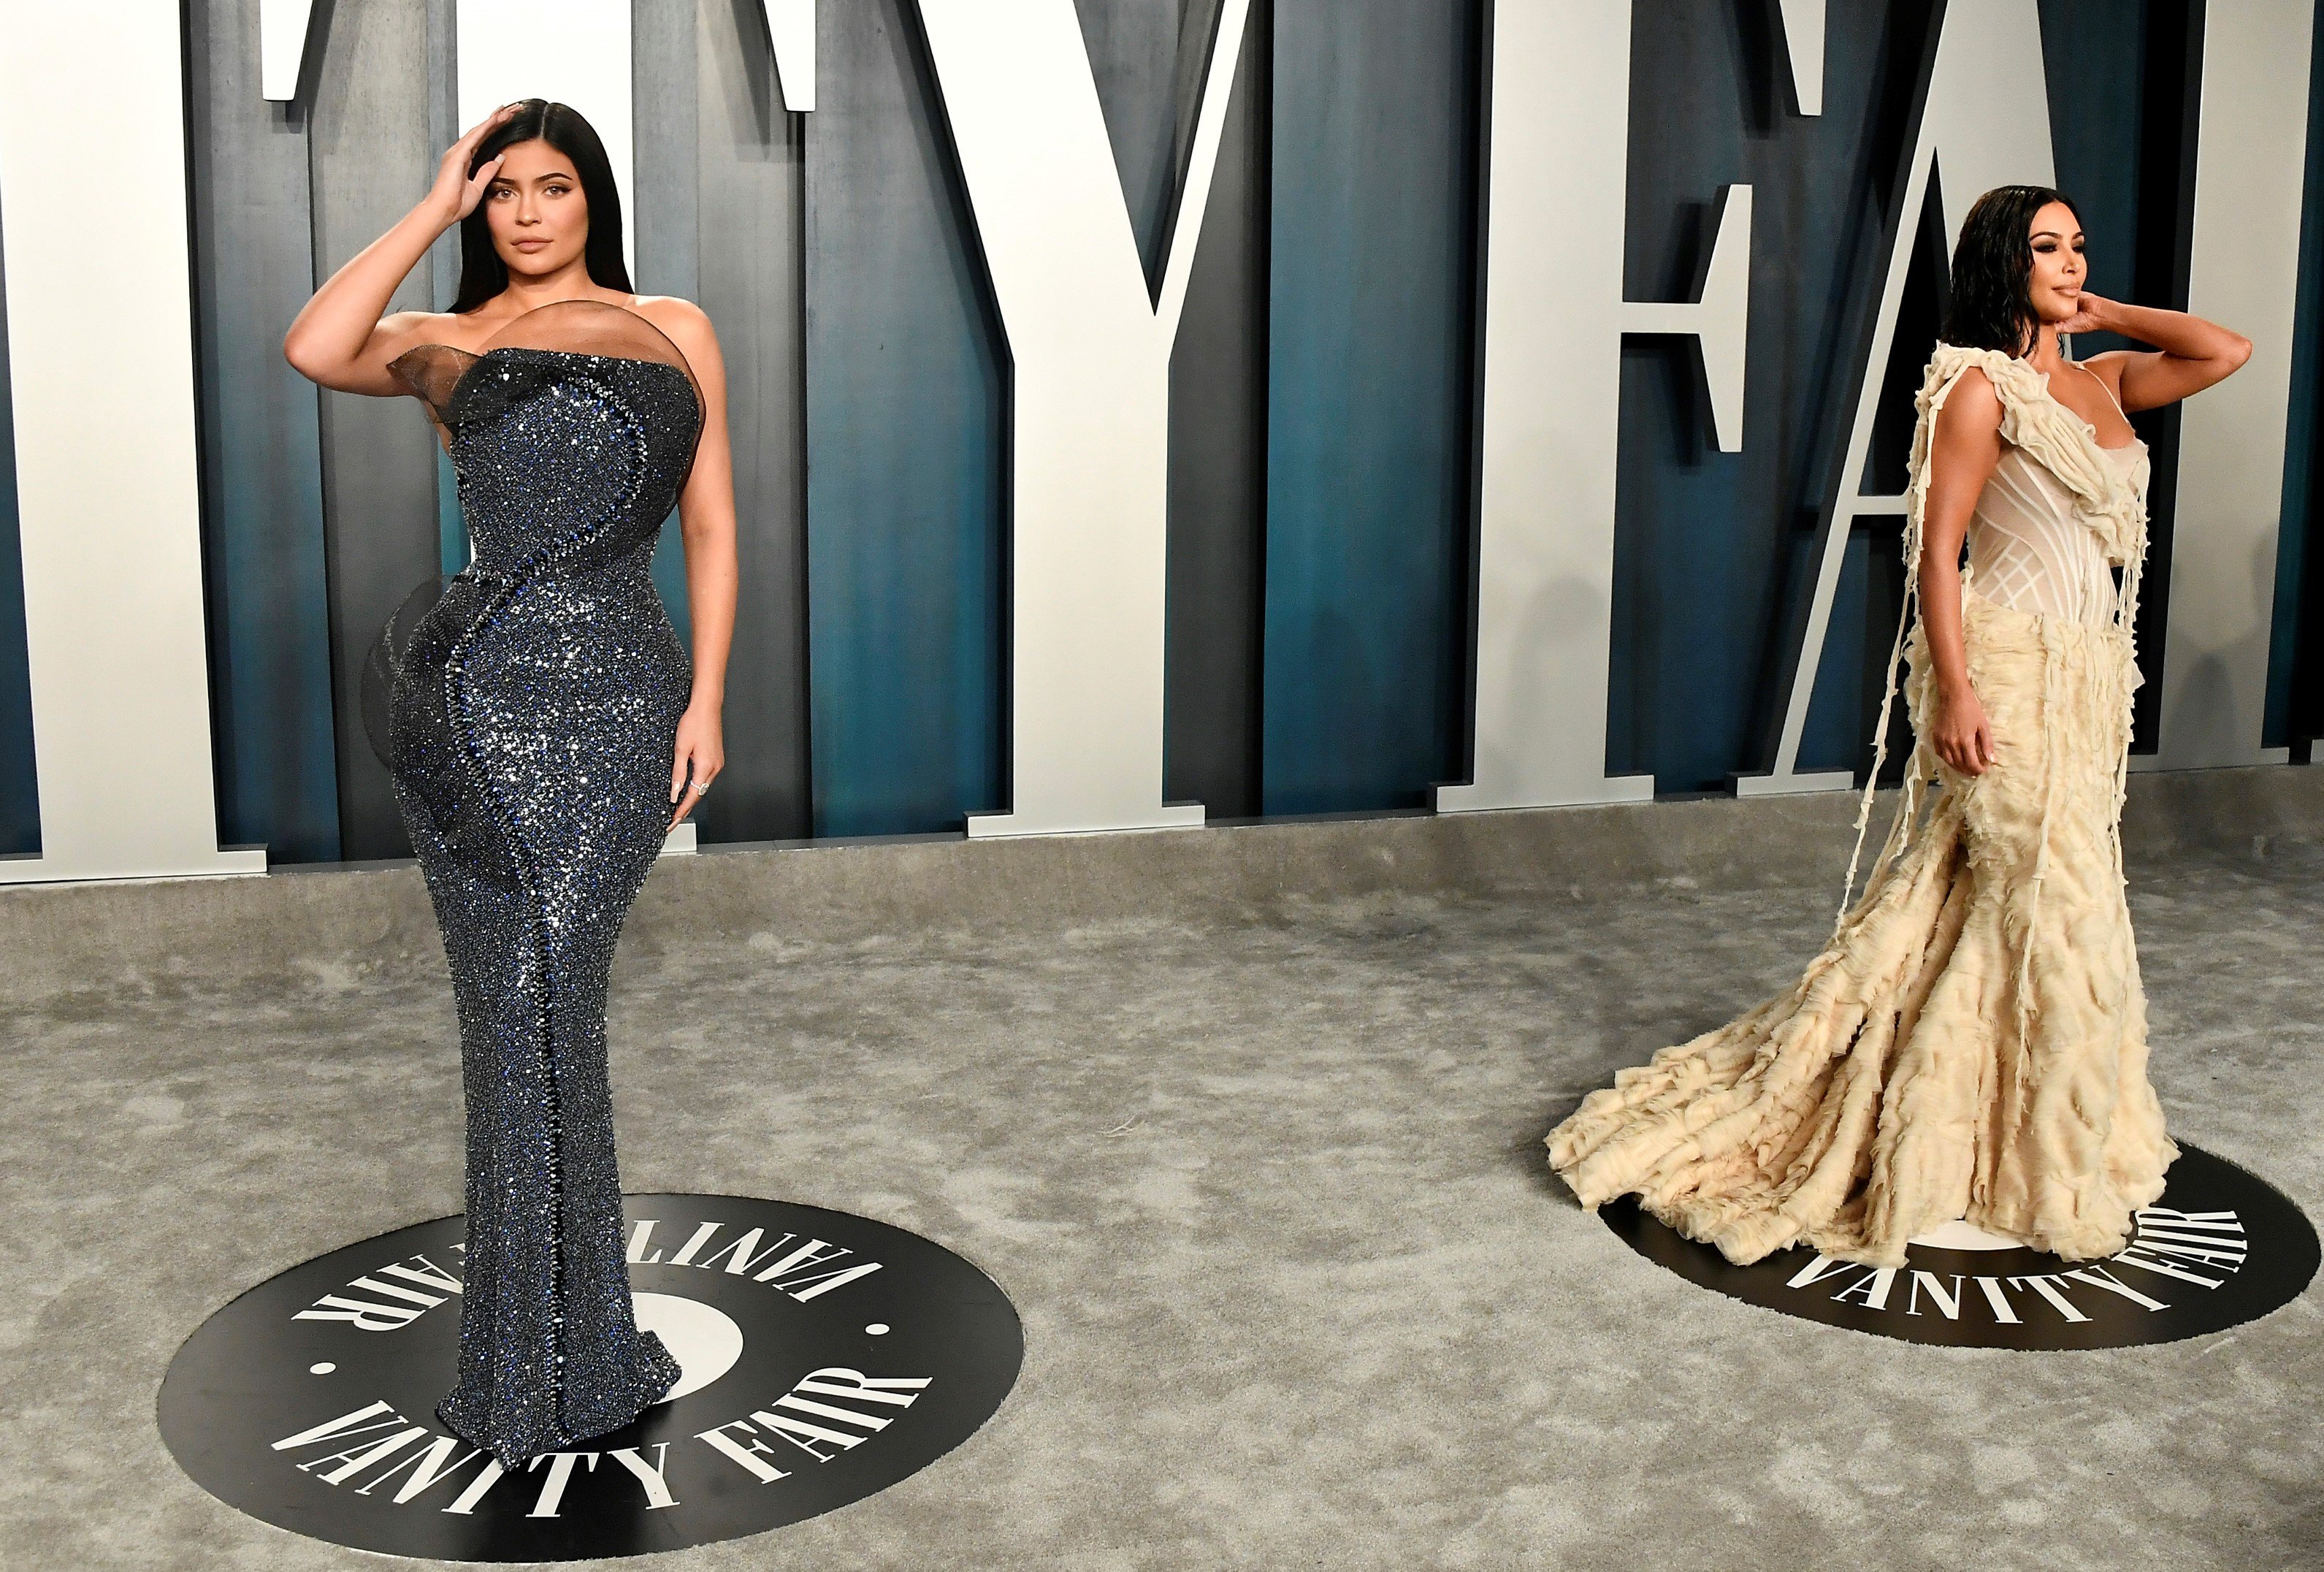 Kylie Jenner dons a sparkling gown and Kim Kardashian West rocks a cream-colored dress on the carpet at the 2020 Vanity Fair Oscar Party